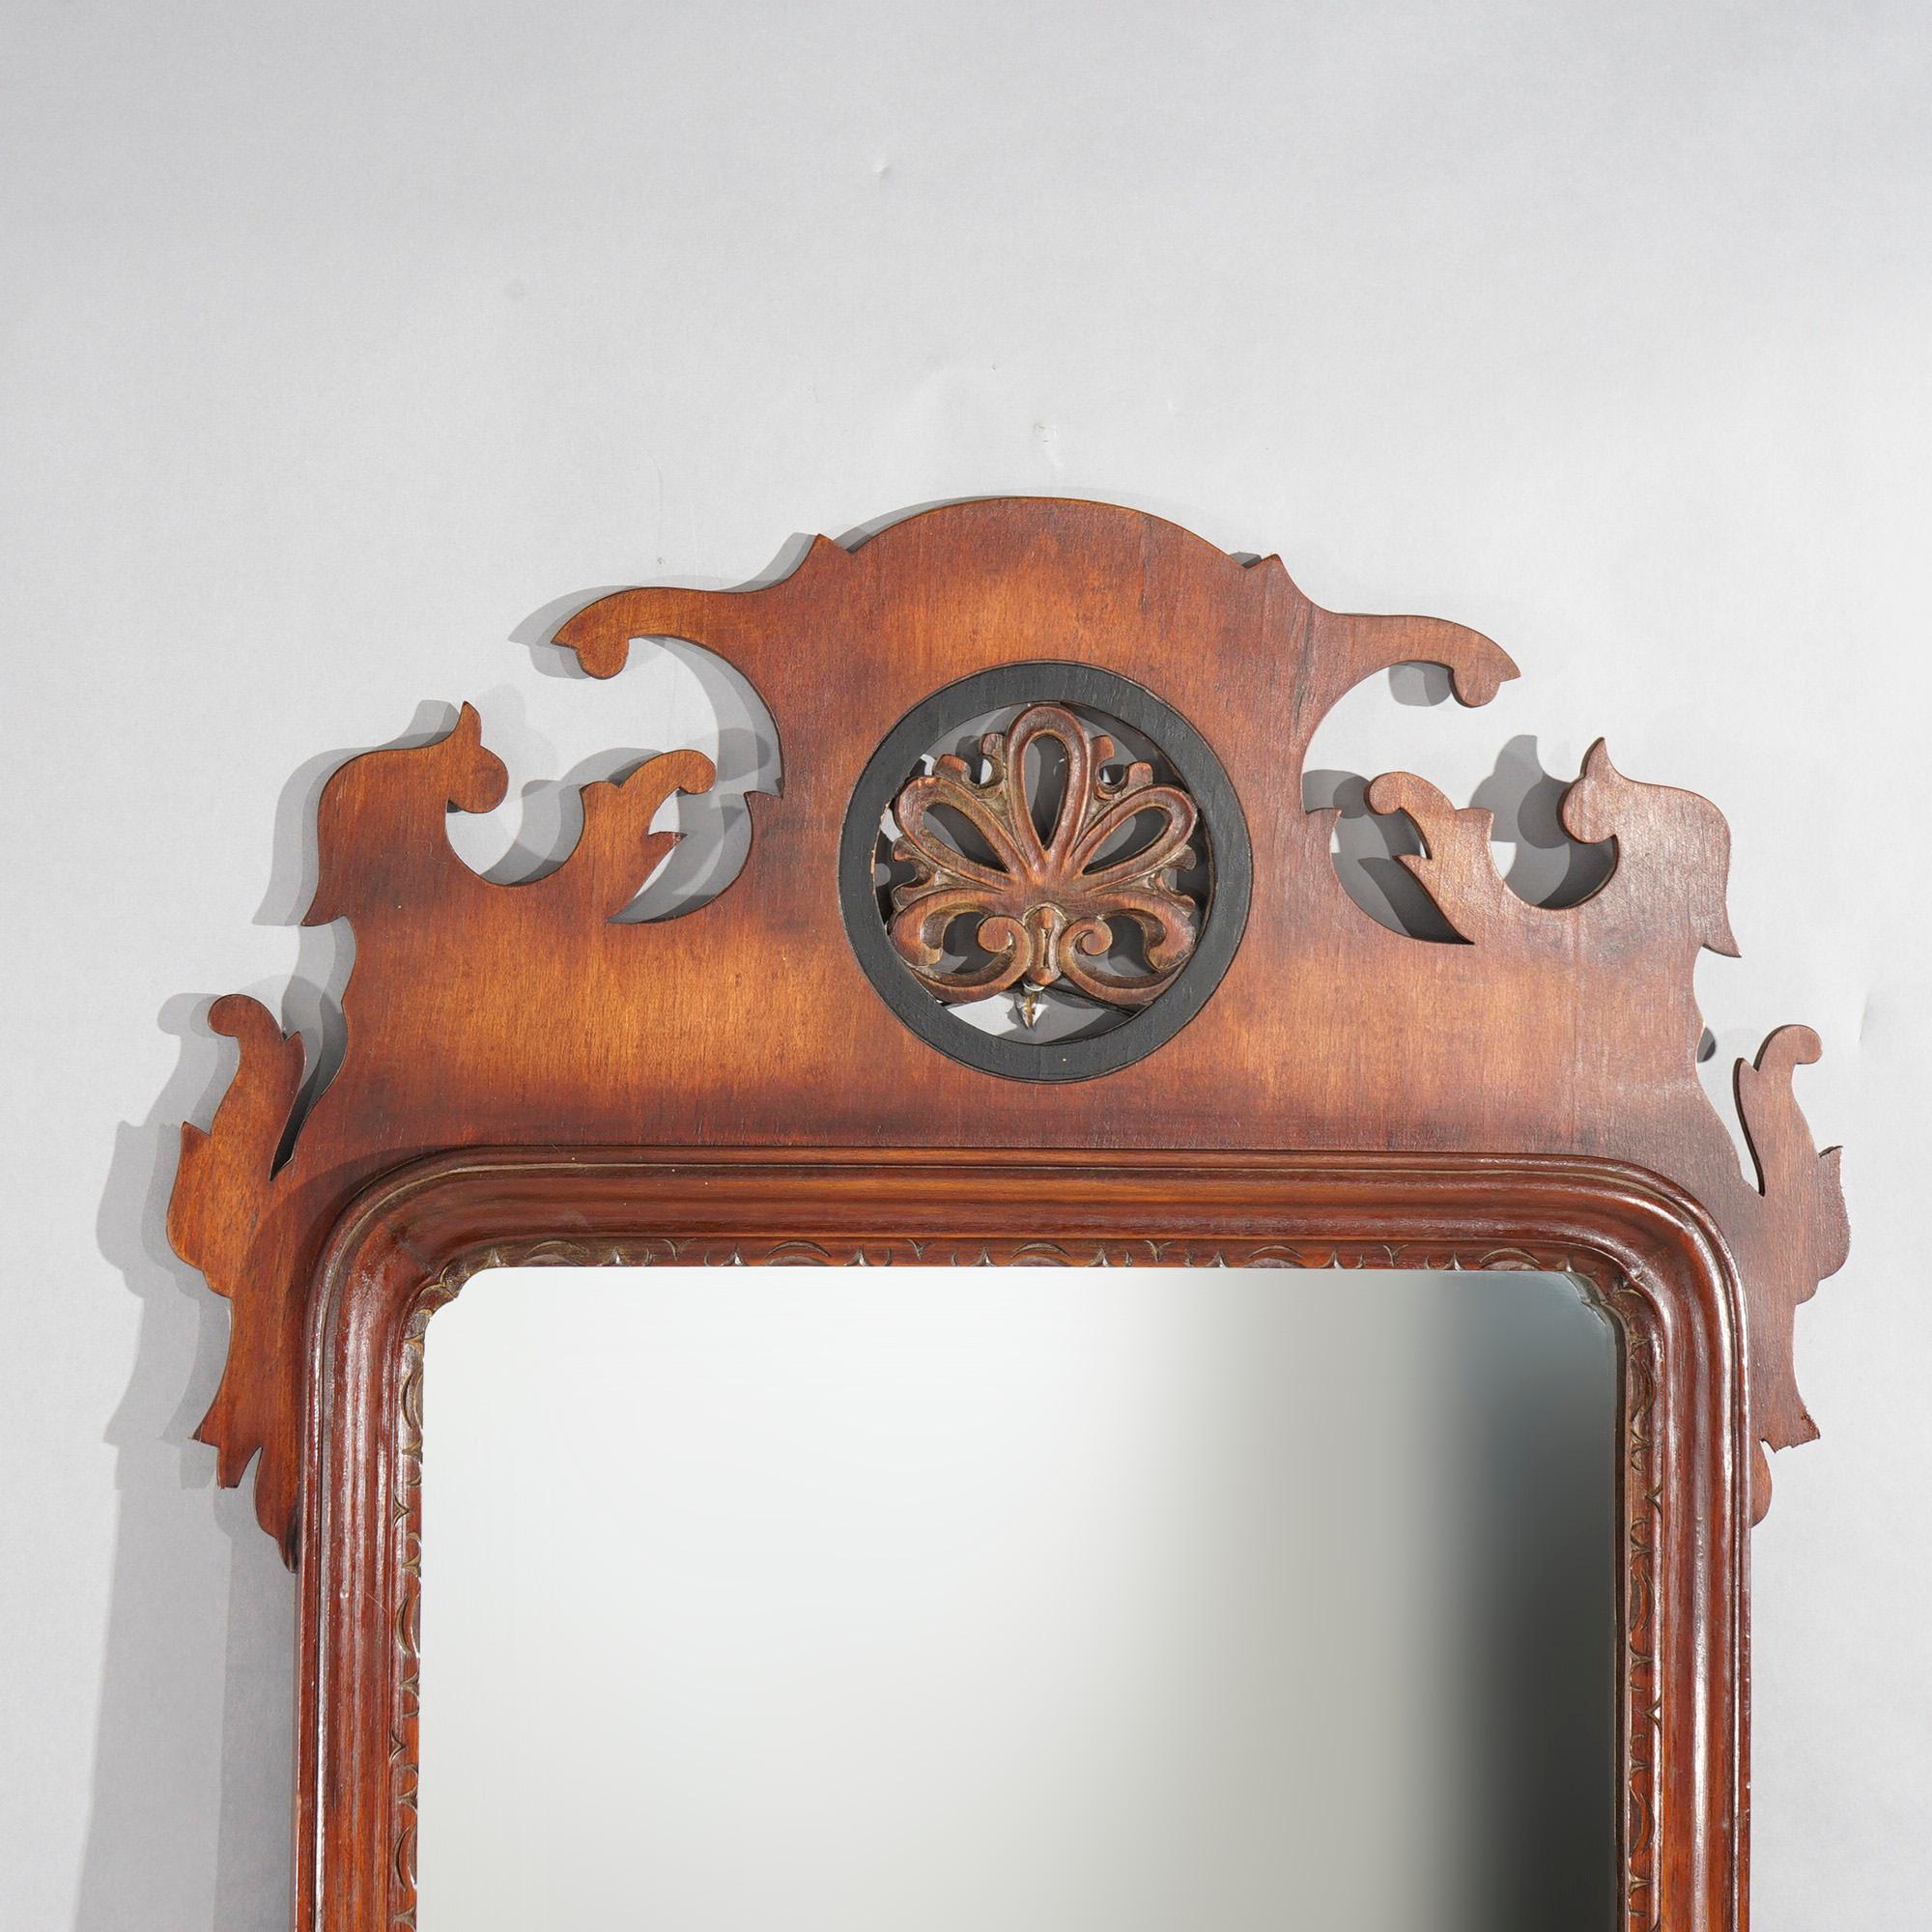 A Chippendale style wall mirror by Simonds offers mahogany frame with stylized cutout flower in ebonized surround at crest over, en verso maker label as photographed, c1940

Measures- 44.25''H x 23.25''W x 1.5''D.

*Ask about DISCOUNTED DELIVERY